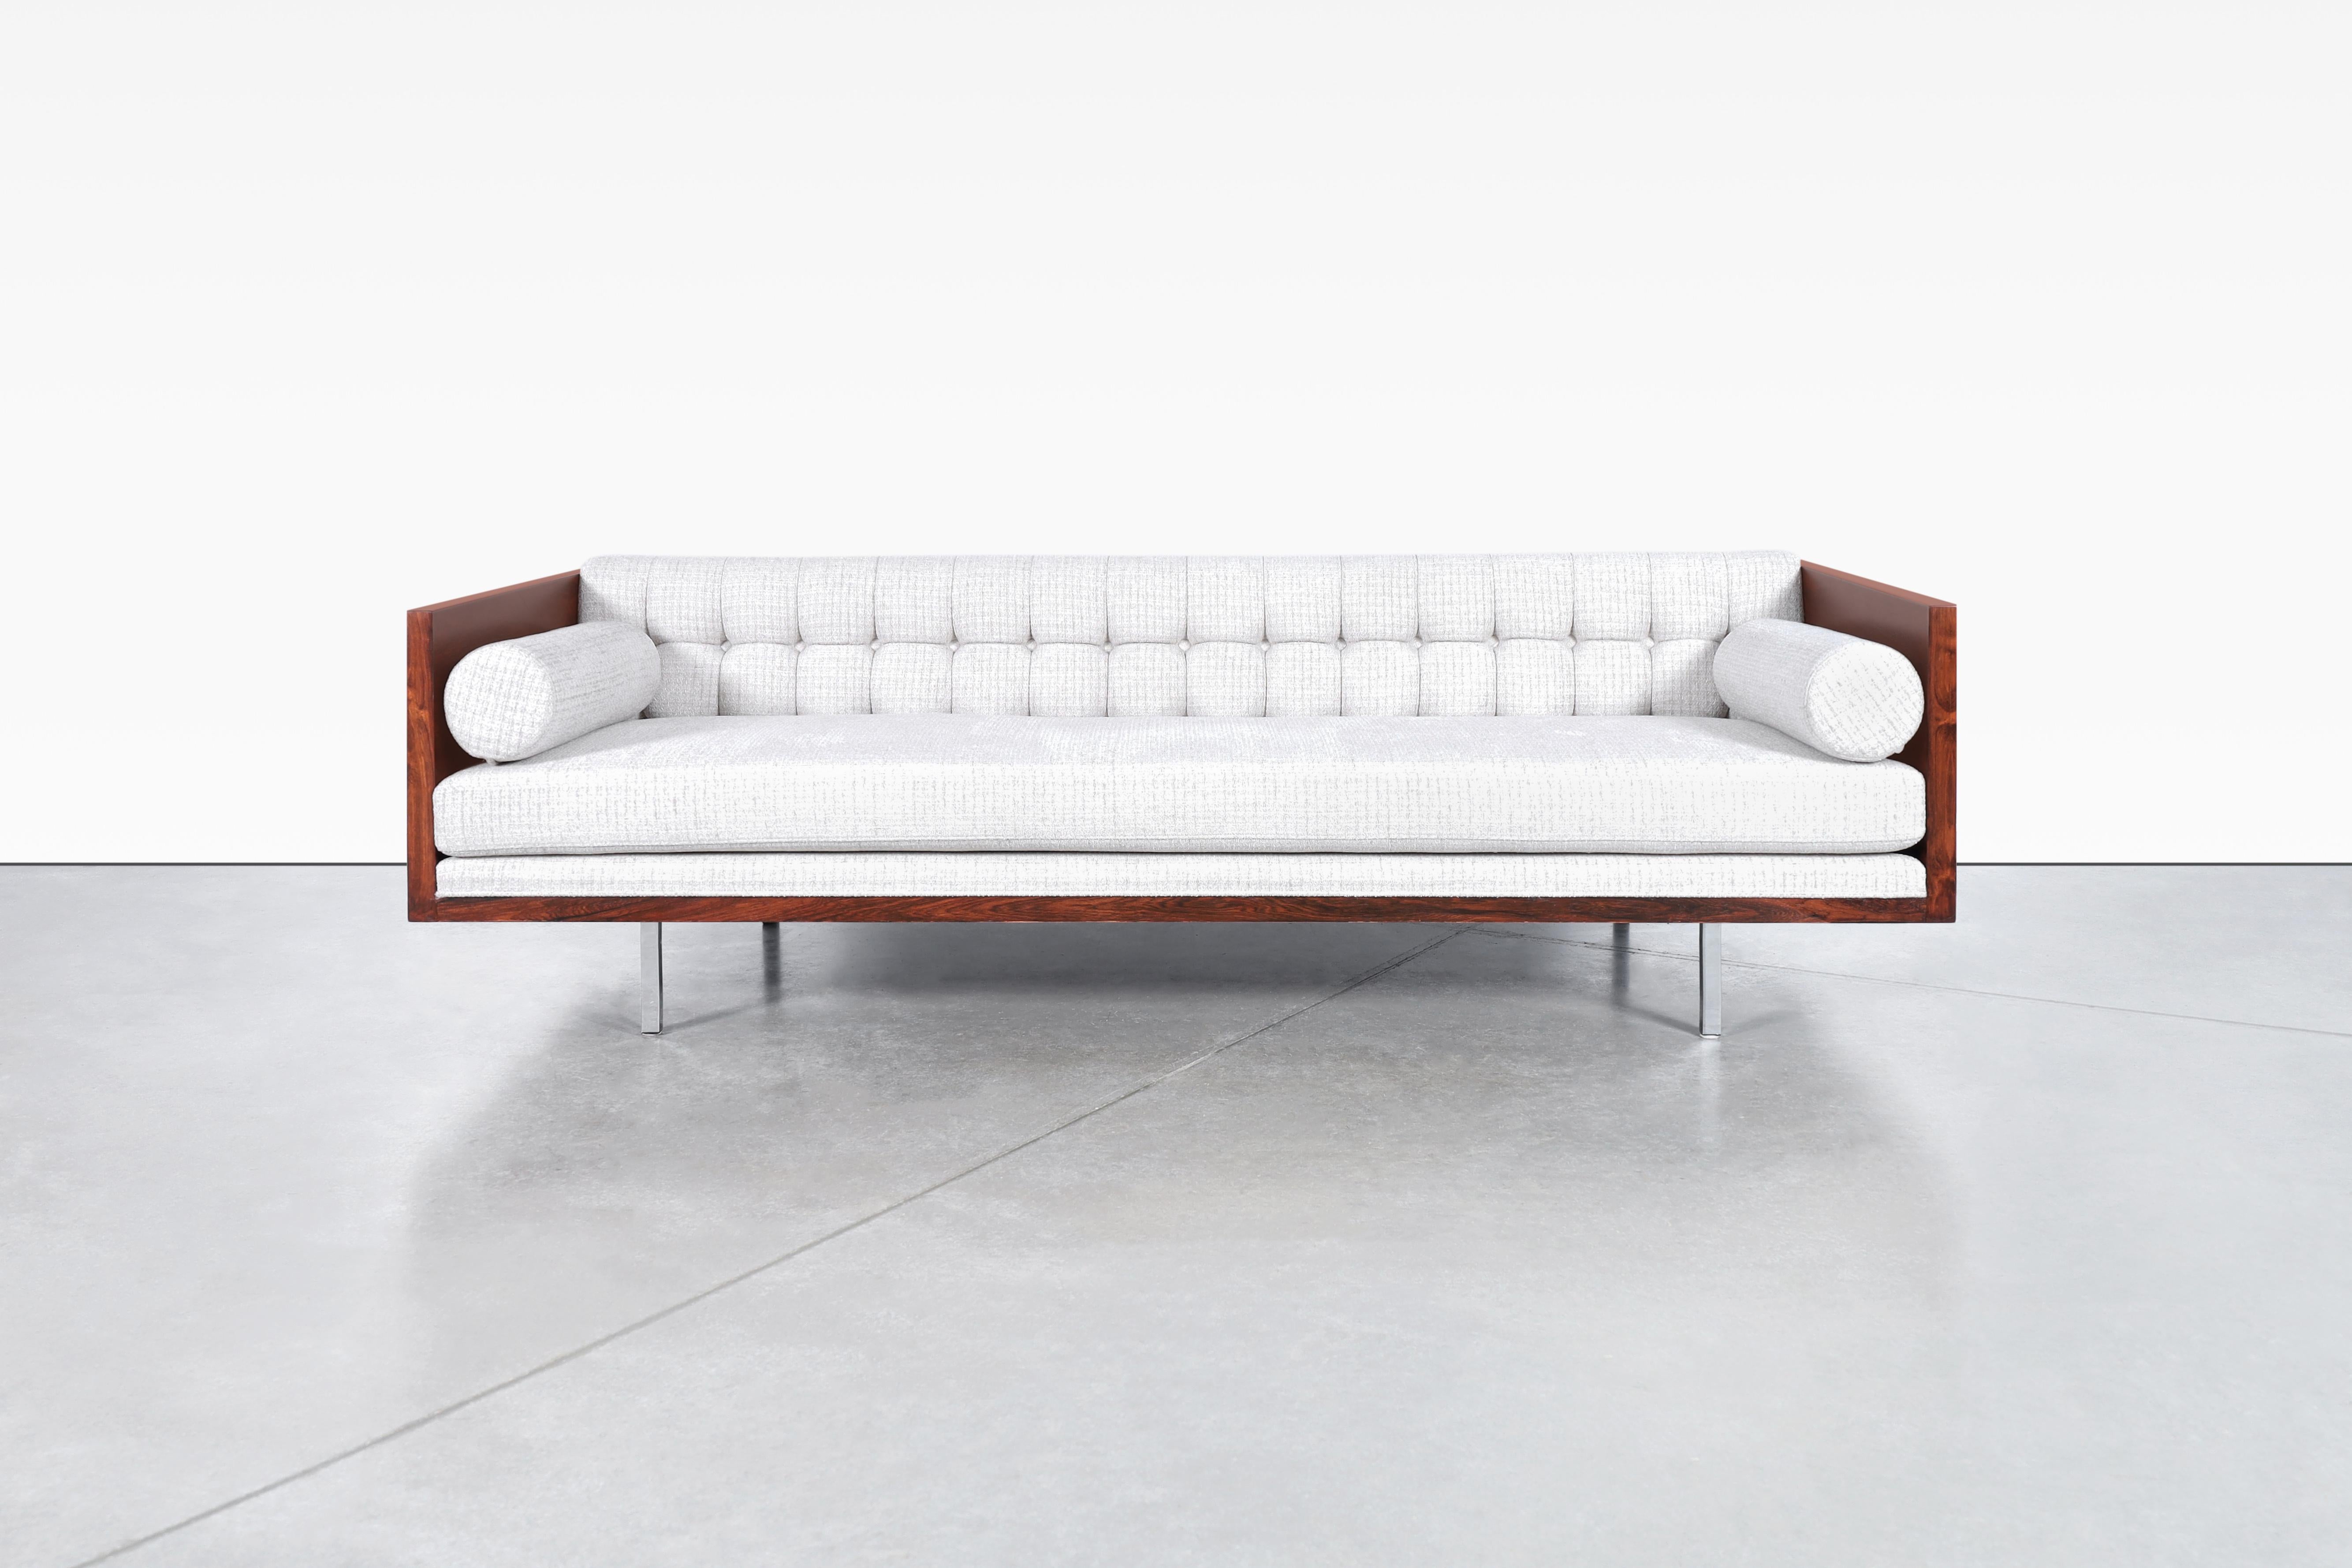 Vintage Brazilian rosewood case sofa designed by the iconic designer Milo Baughman for Thayer Coggin in the United States, circa 1960s. Experience timeless elegance with this stunning Brazilian rosewood sofa, expertly refinished and reupholstered by